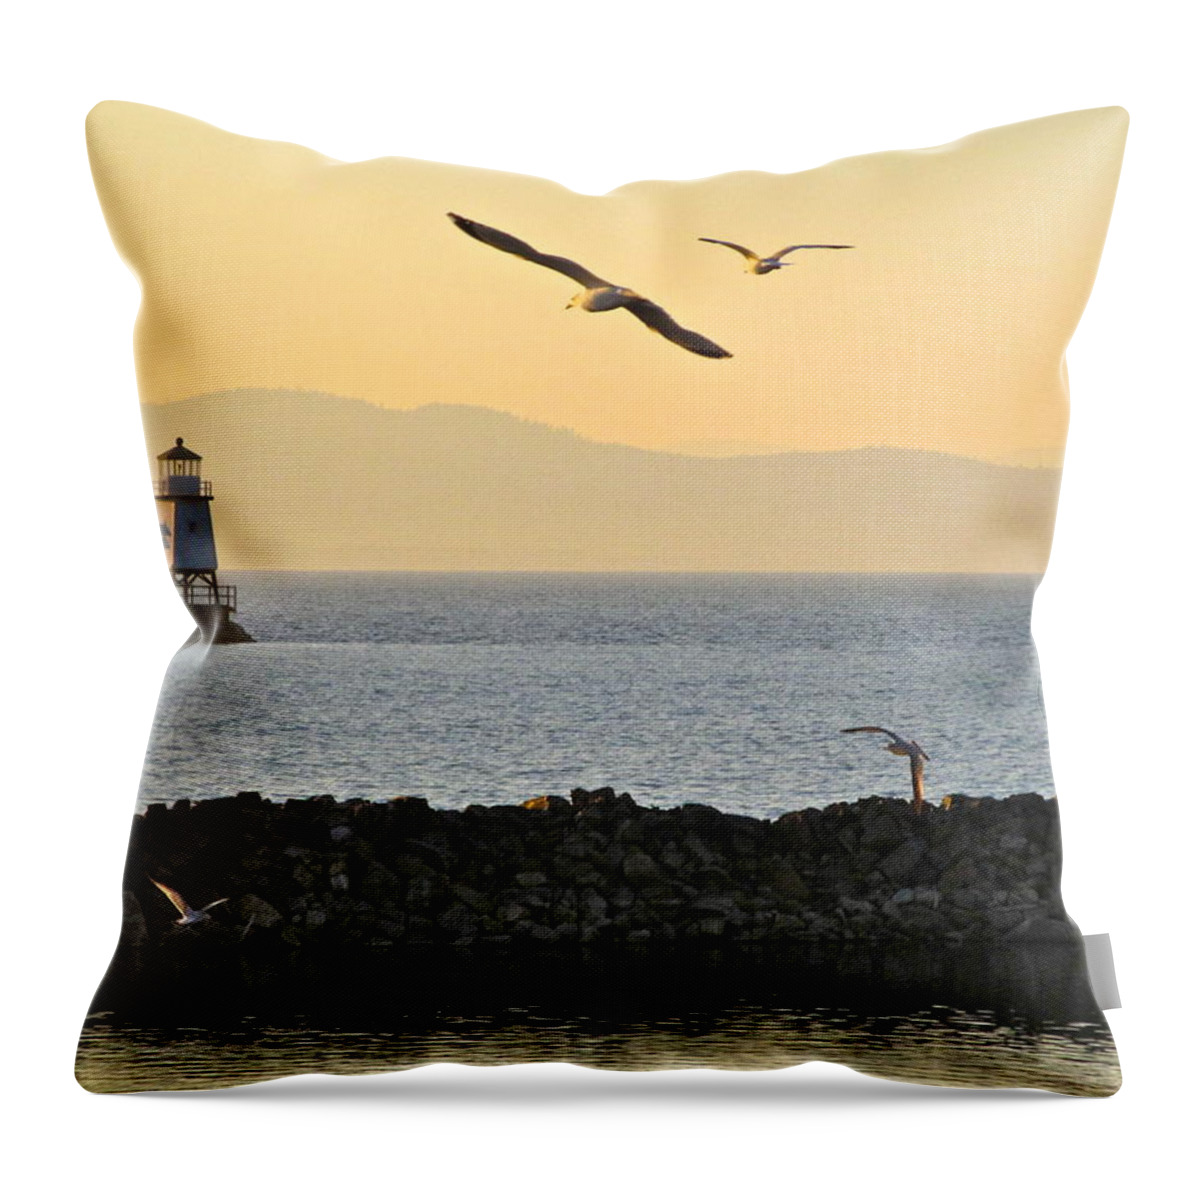 Digital Photography Throw Pillow featuring the photograph Fly By by Mike Reilly